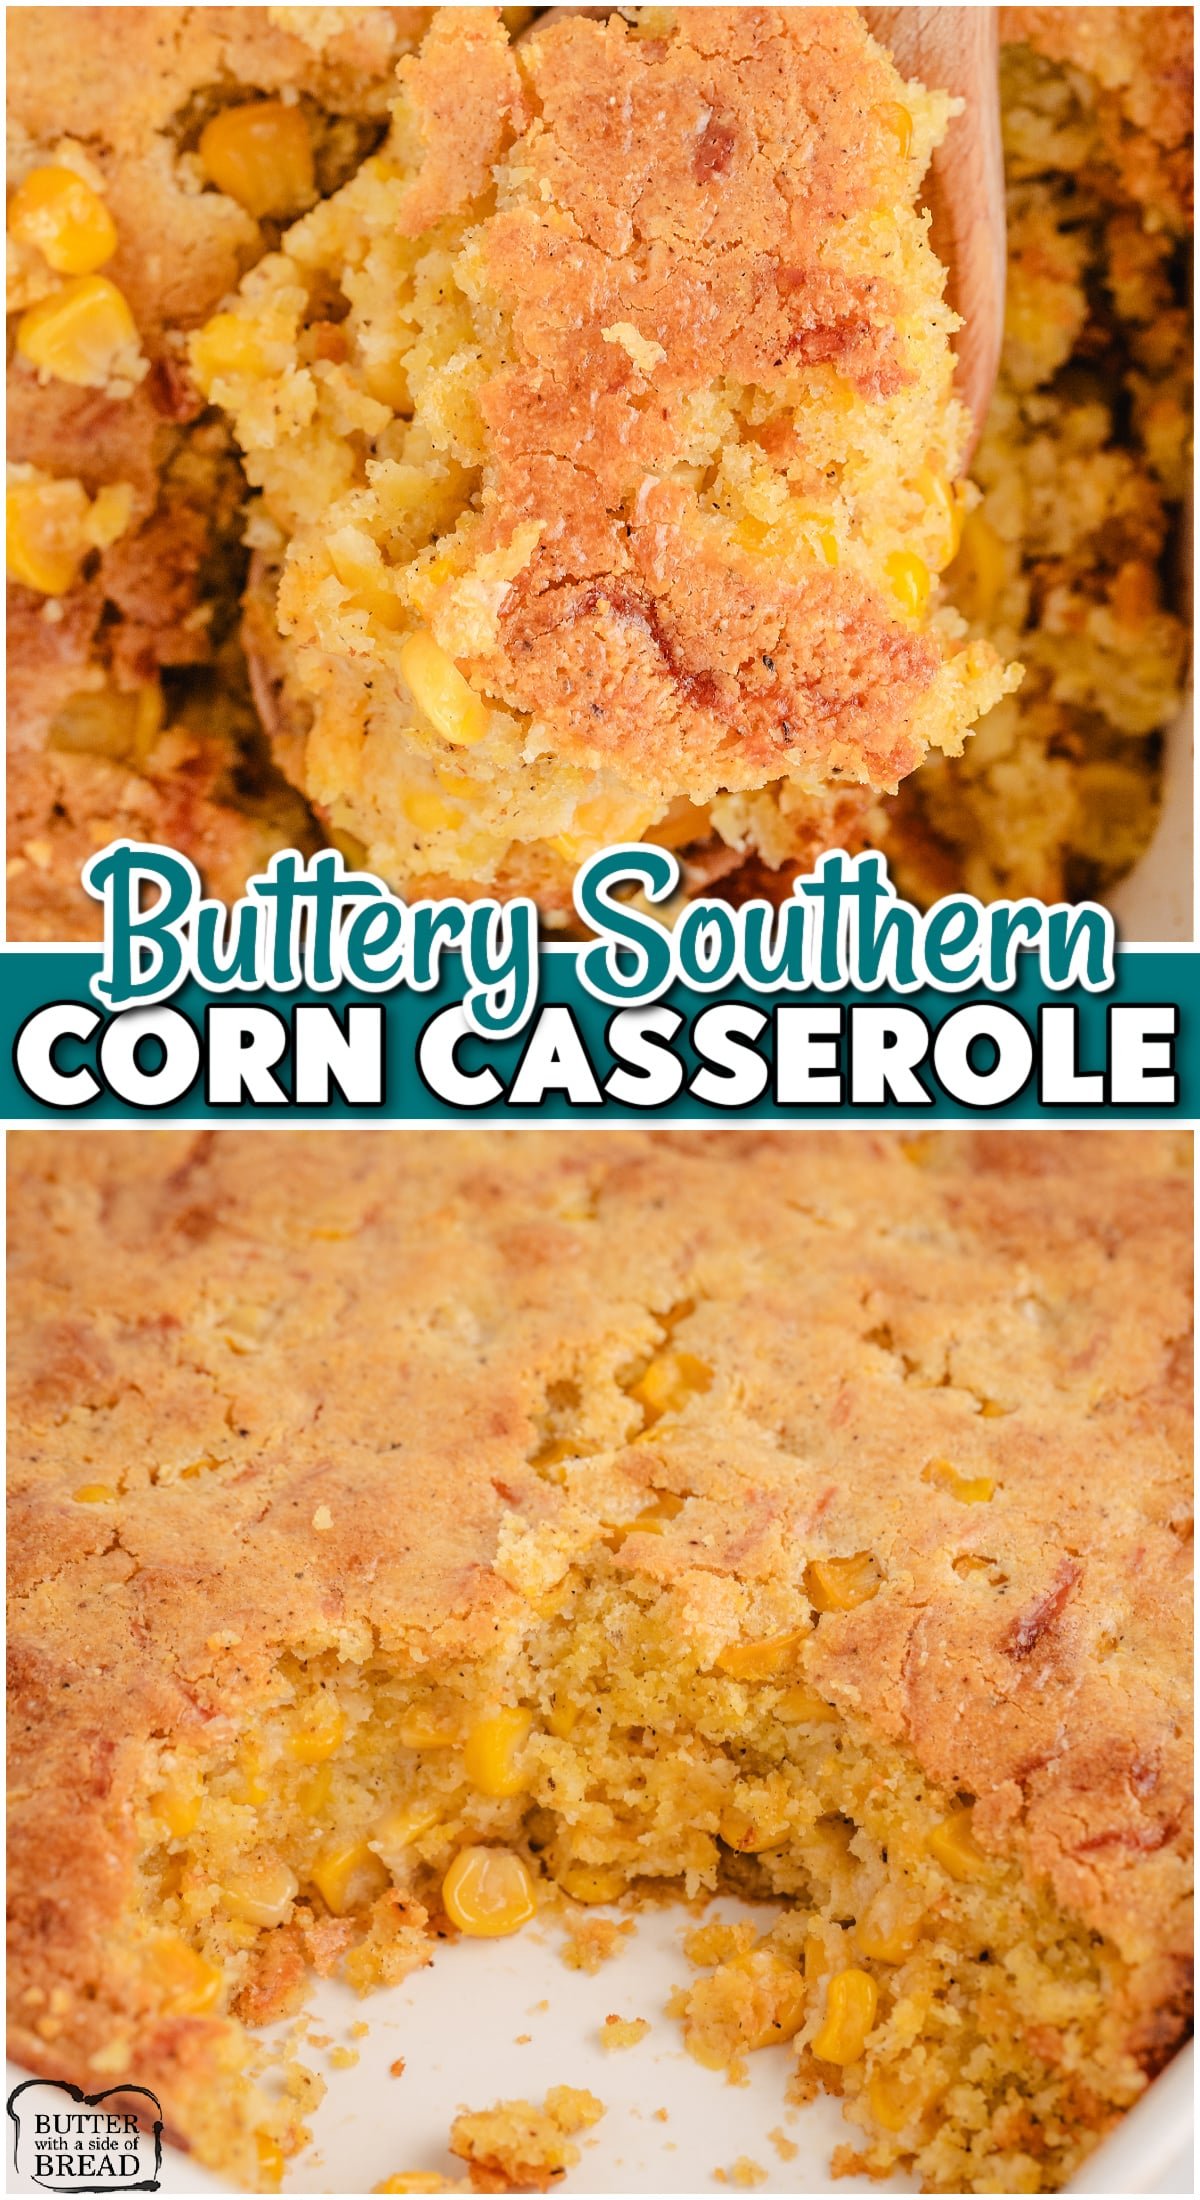 Buttery Southern Corn Casserole is made with corn, Jiffy muffin mix, butter, sour cream, & seasonings for a fantastic holiday side dish! Flavorful baked corn casserole that's easy to make!